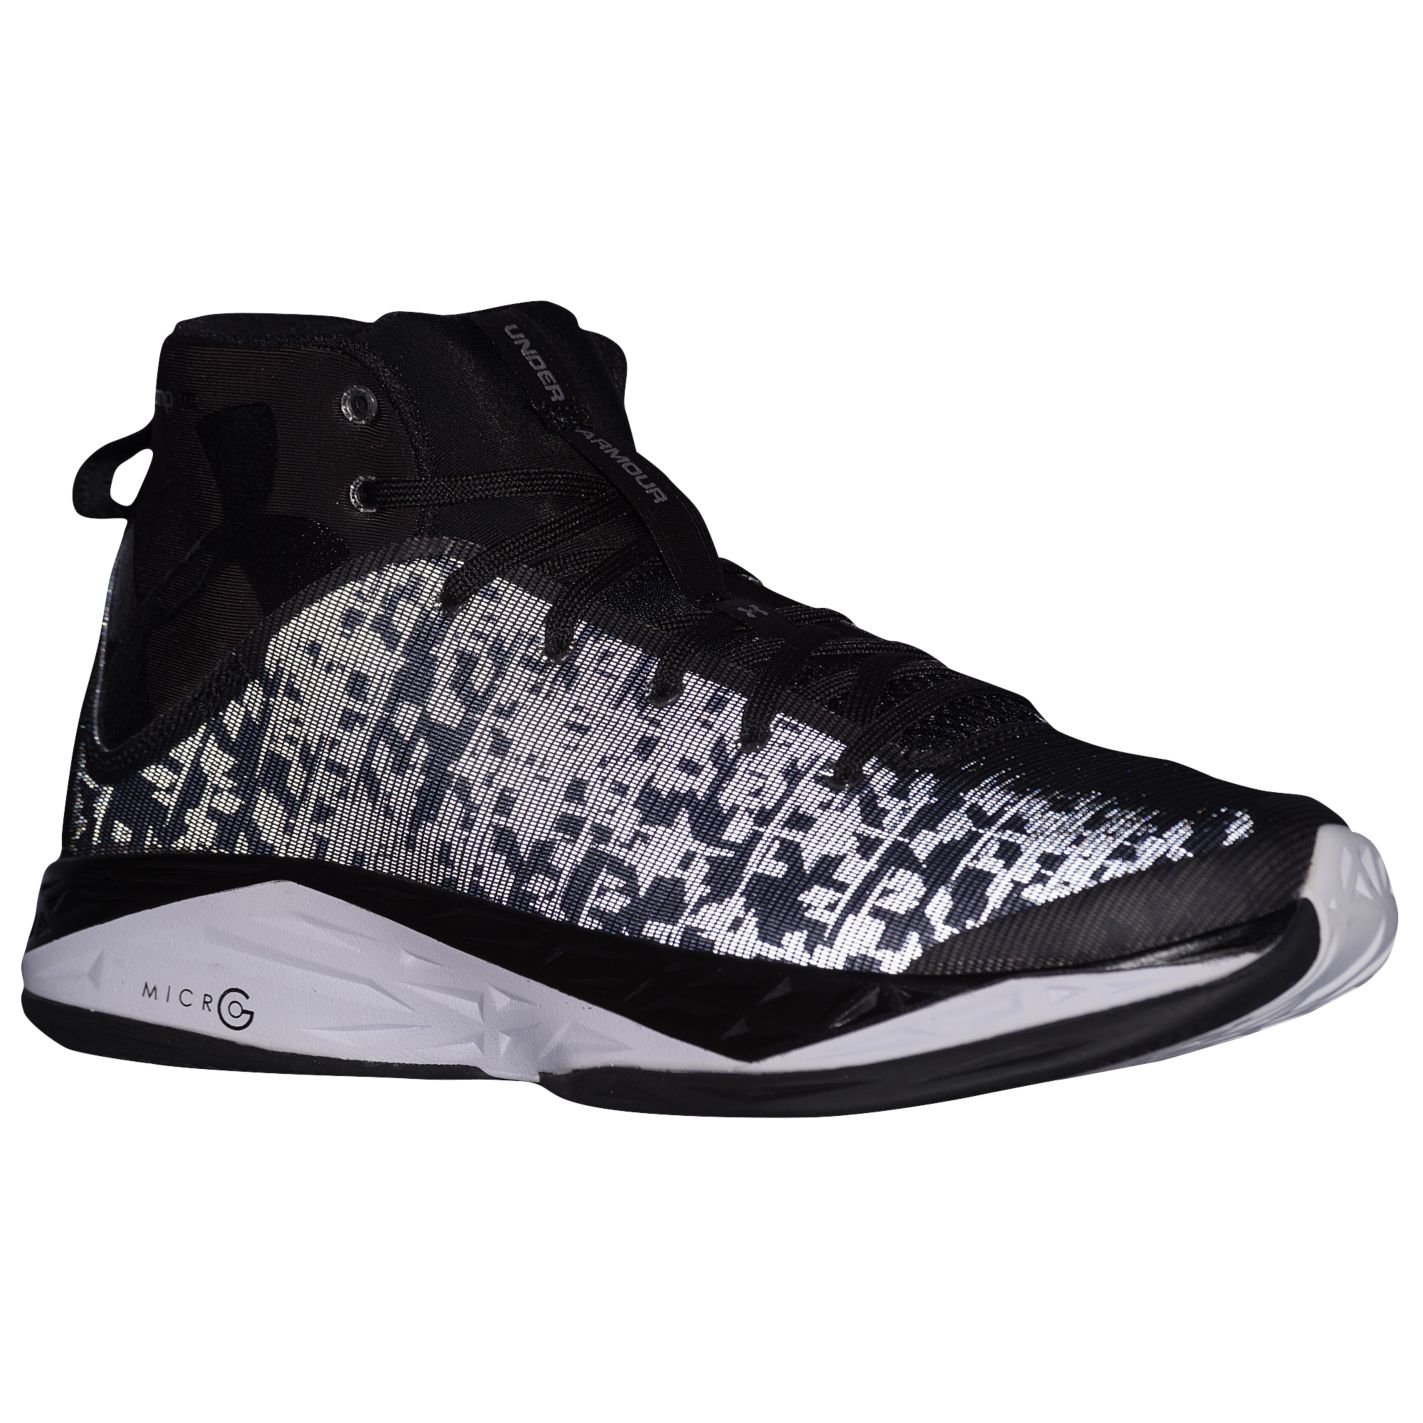 The Under Armour Fire Shot is Available Now 8